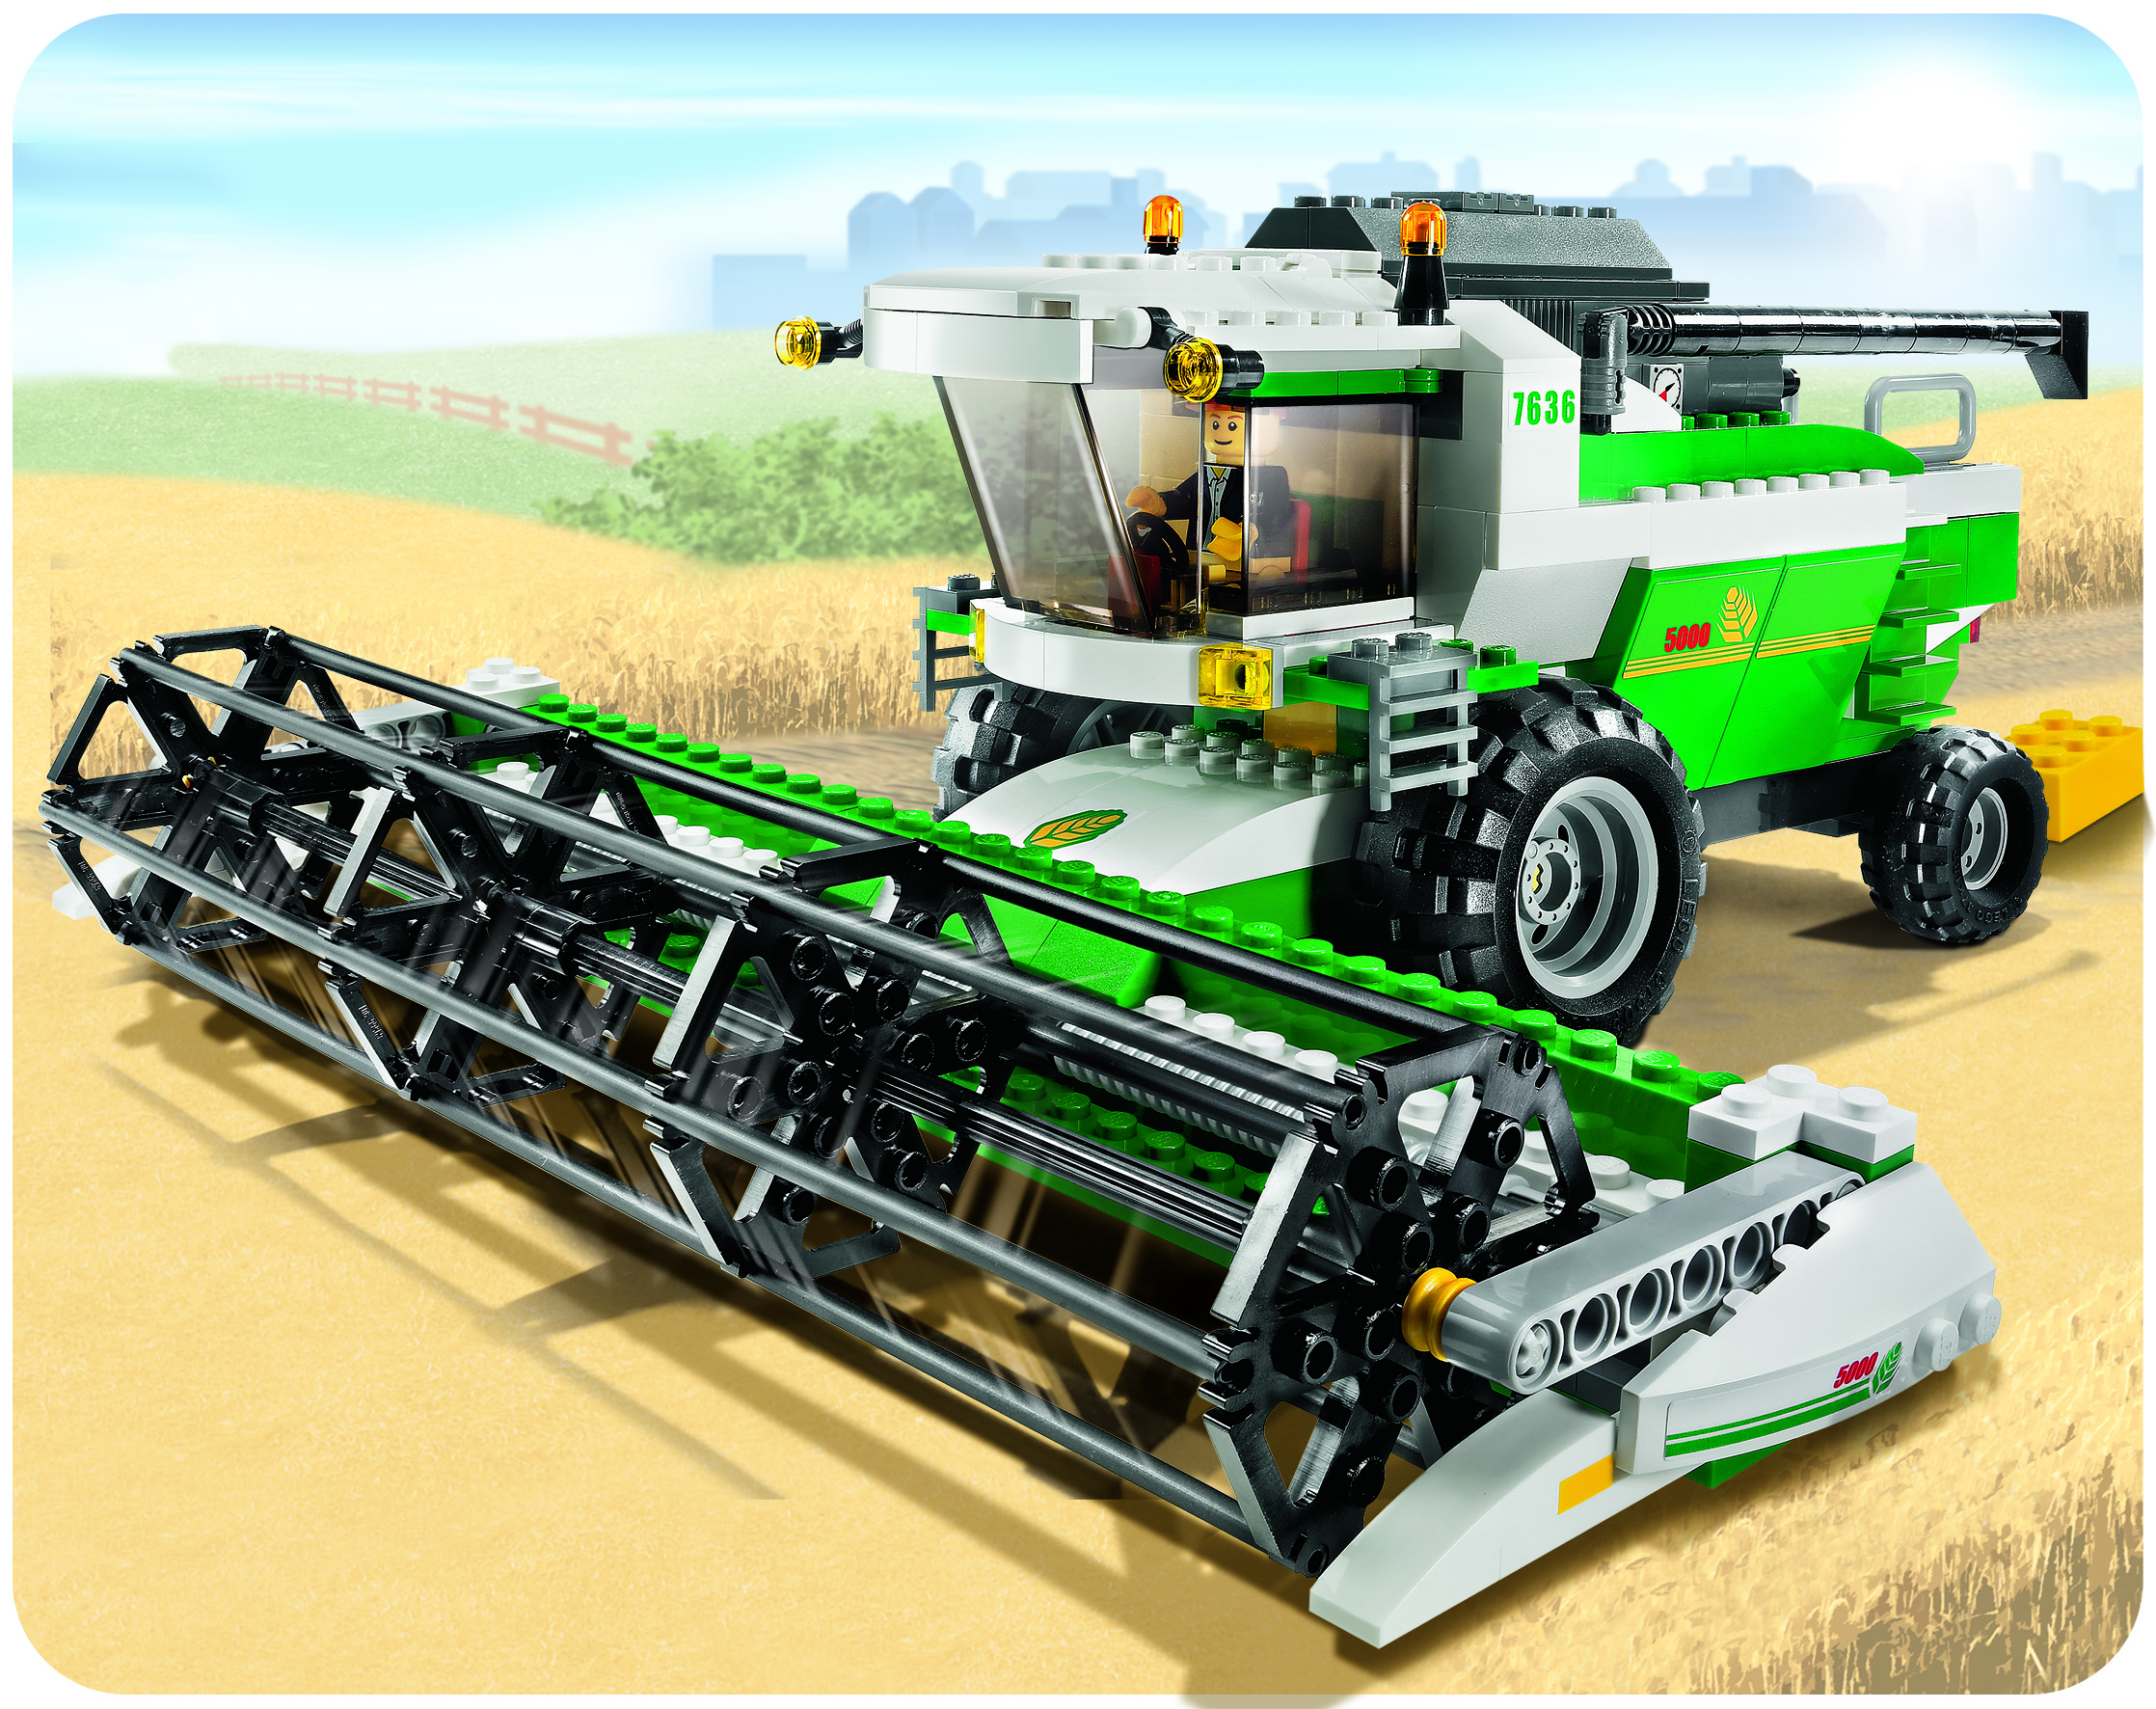 Lego City Farm Combine Harvester - Parenting Without Tears